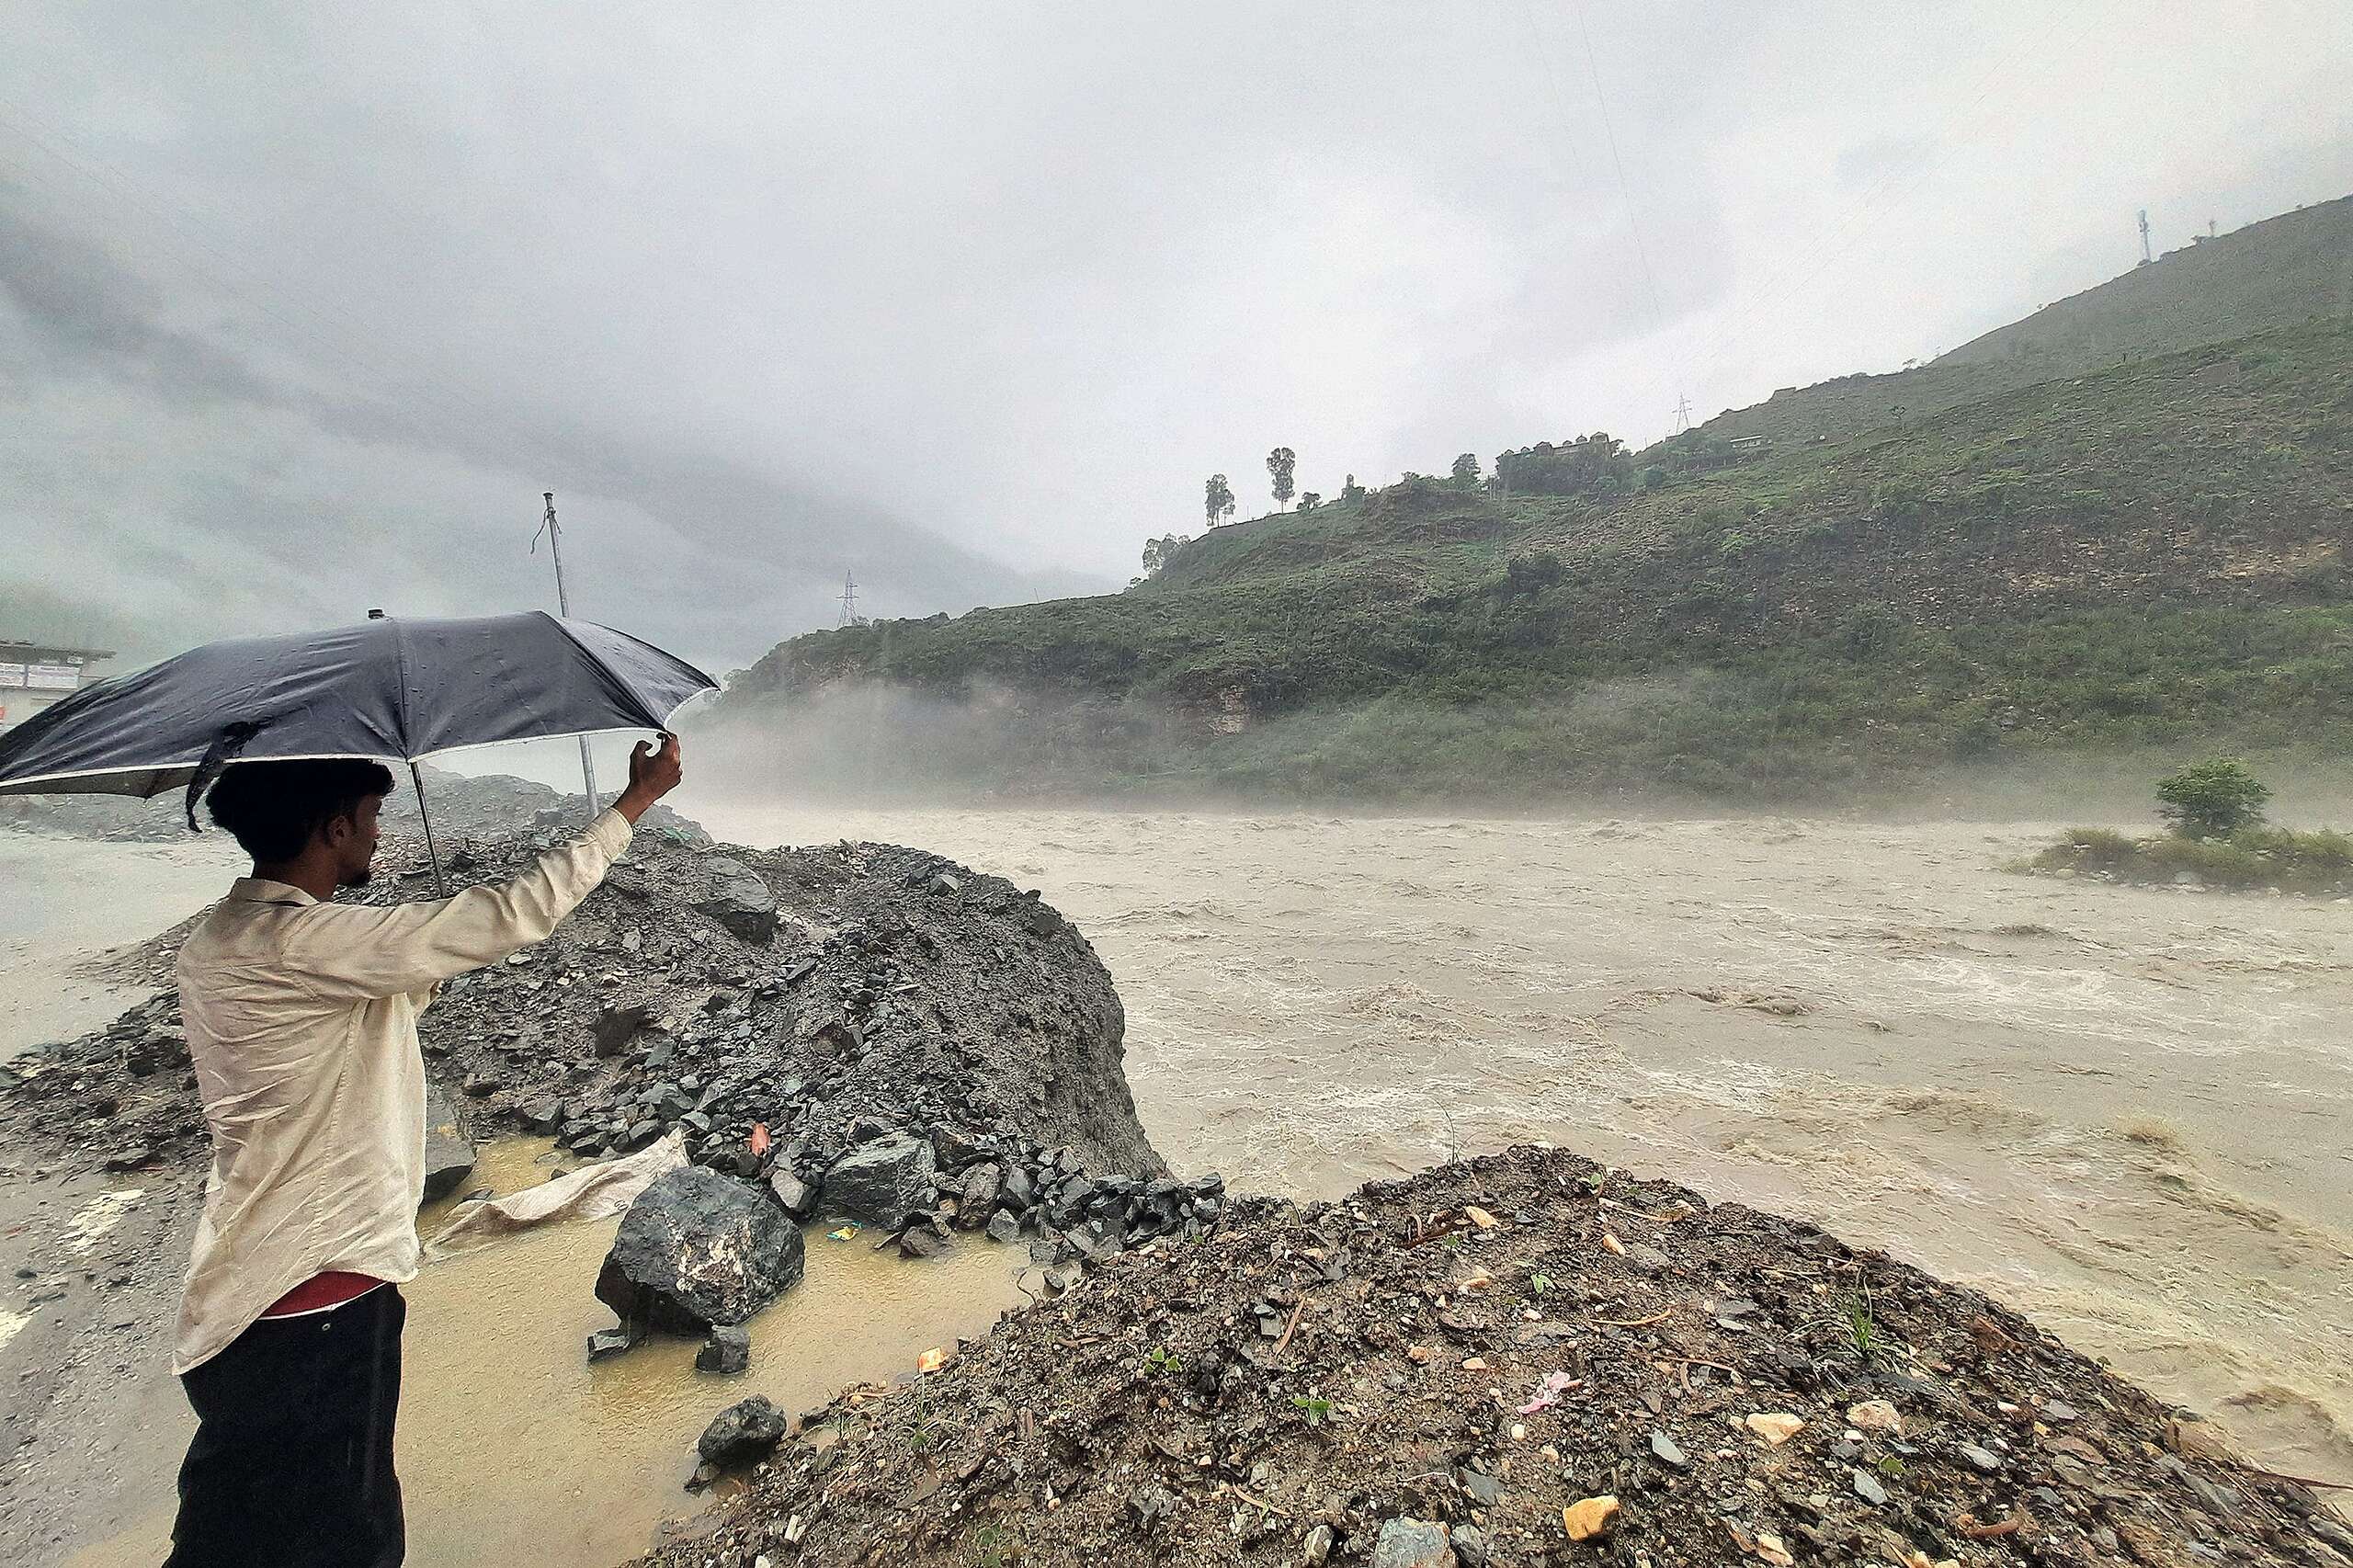 A man holds an umbrella while standing on the banks of swollen river Satluj after heavy monsoon rains in Rampur, in India's Himachal Pradesh state. © AFP via Getty Images